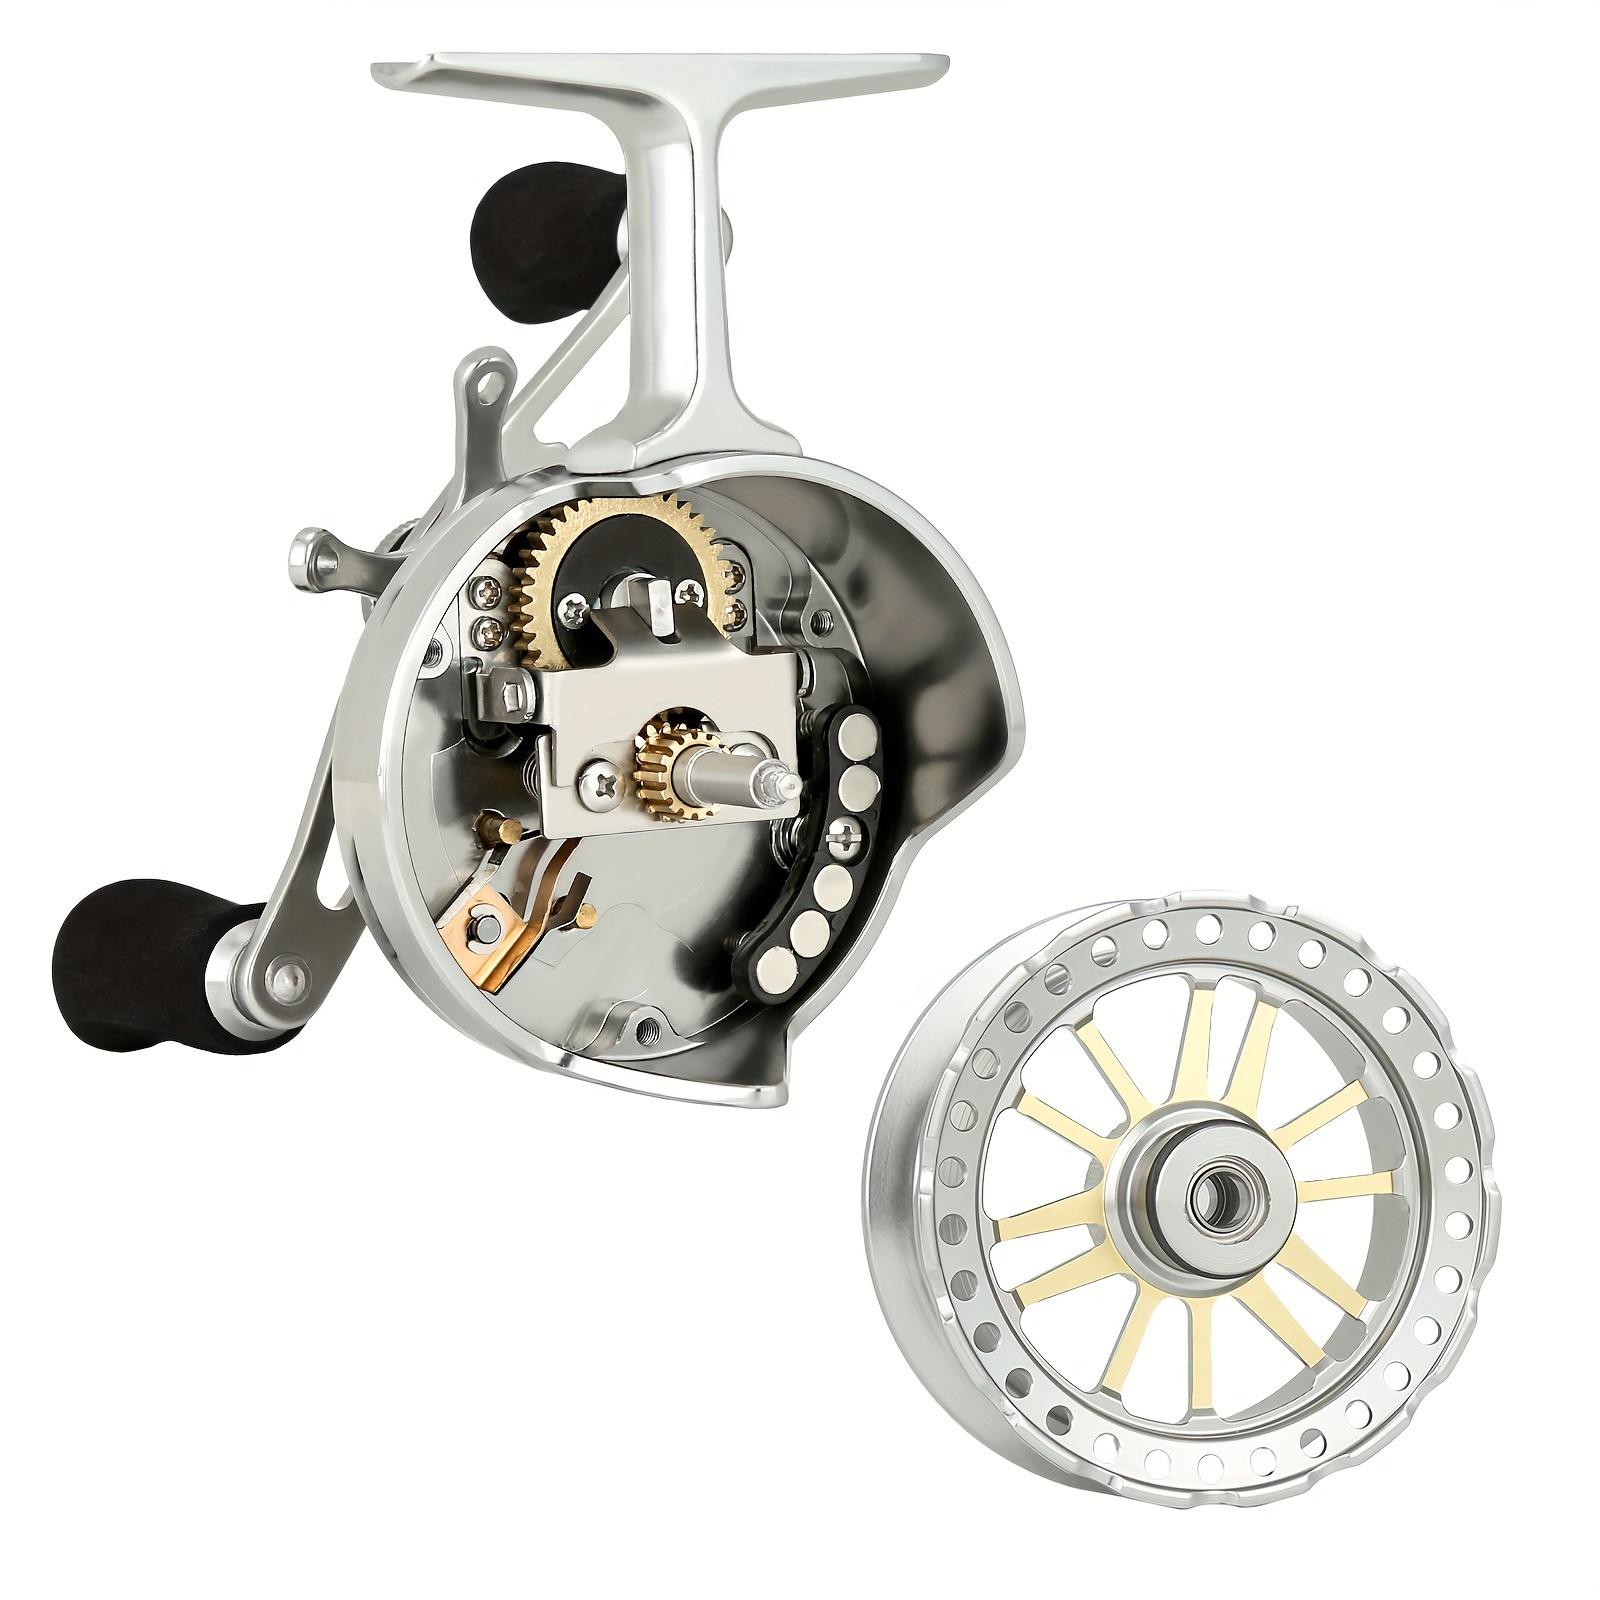 1pc Inline Ice Fishing Reel, Magnetic Drop Speed Control, Adjustable Star  Drag, CNC Machined Aluminum, 2.7:1 Gear Ratio